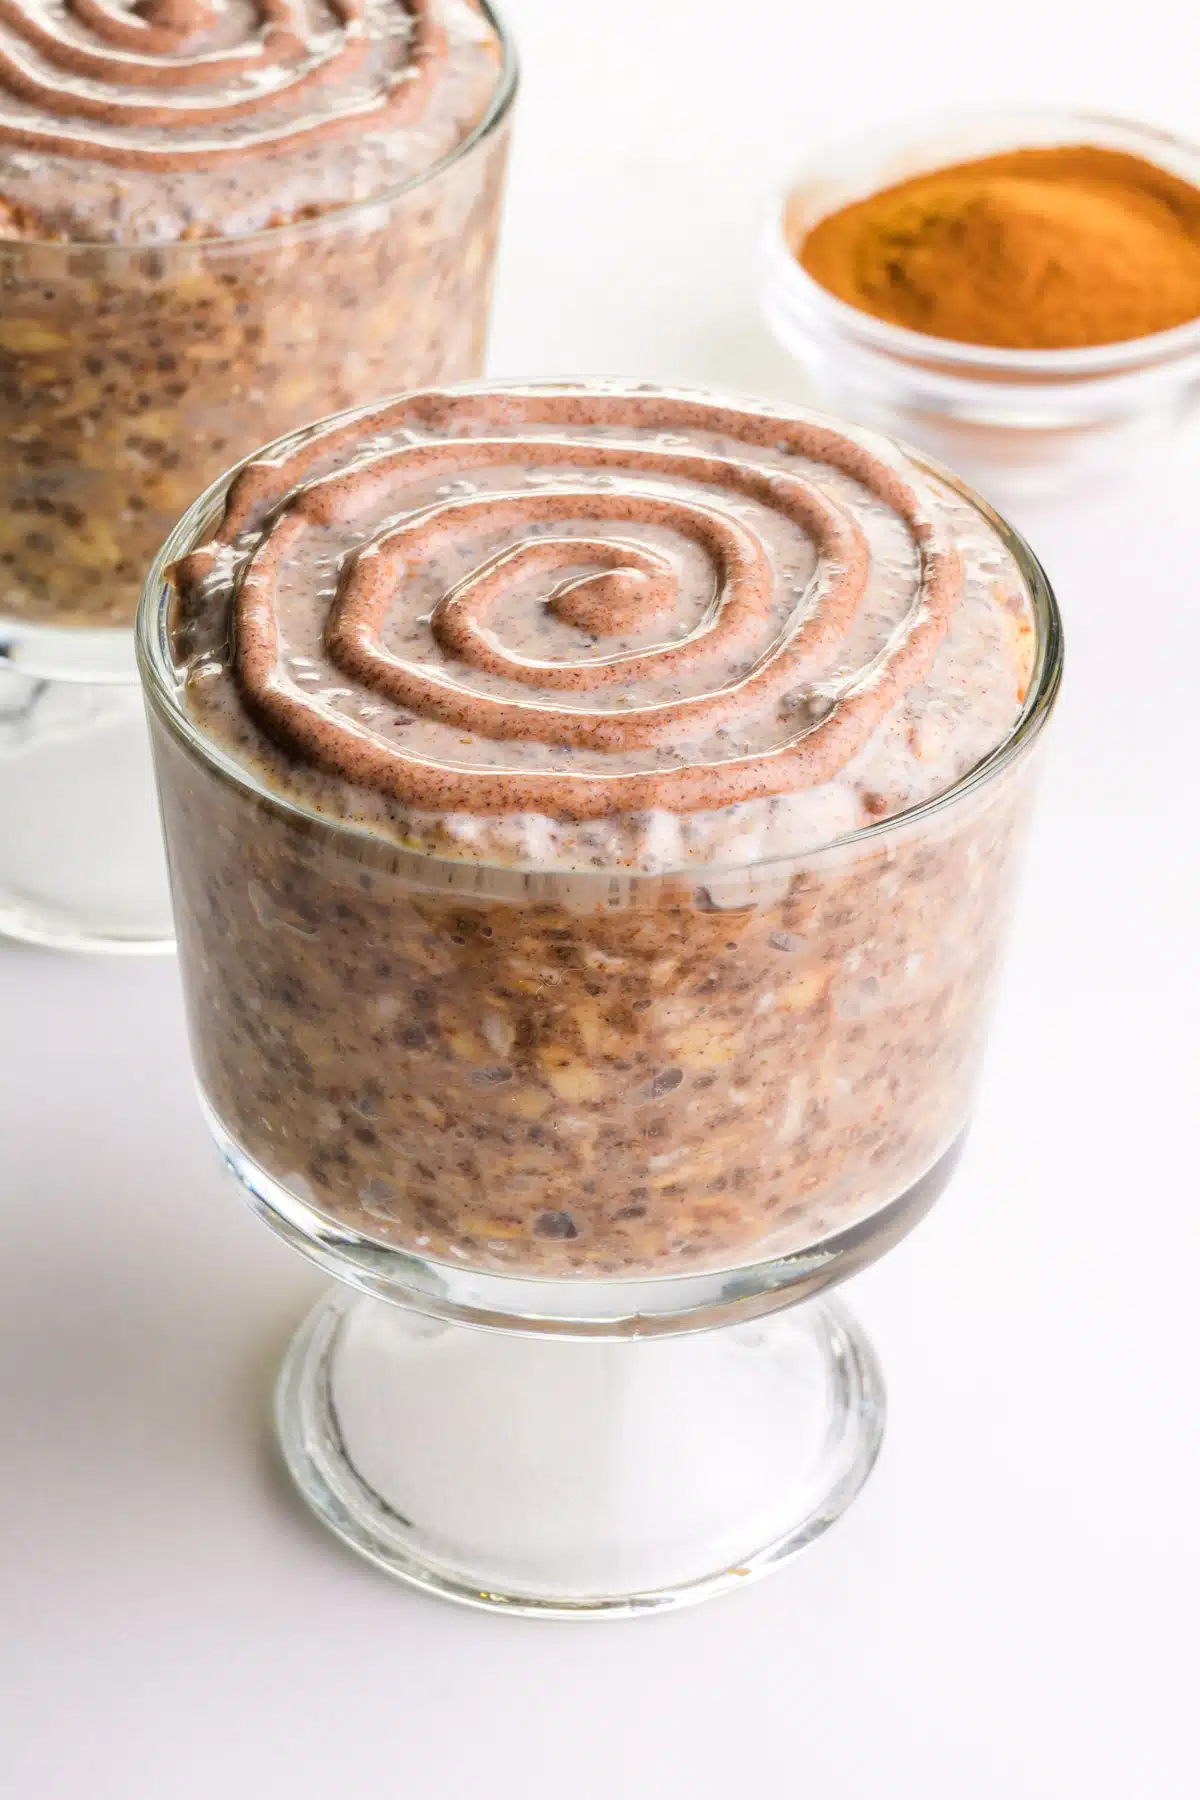 Two bowls of cinnamon roll overnight oats sits beside a bowl of ground cinnamon.